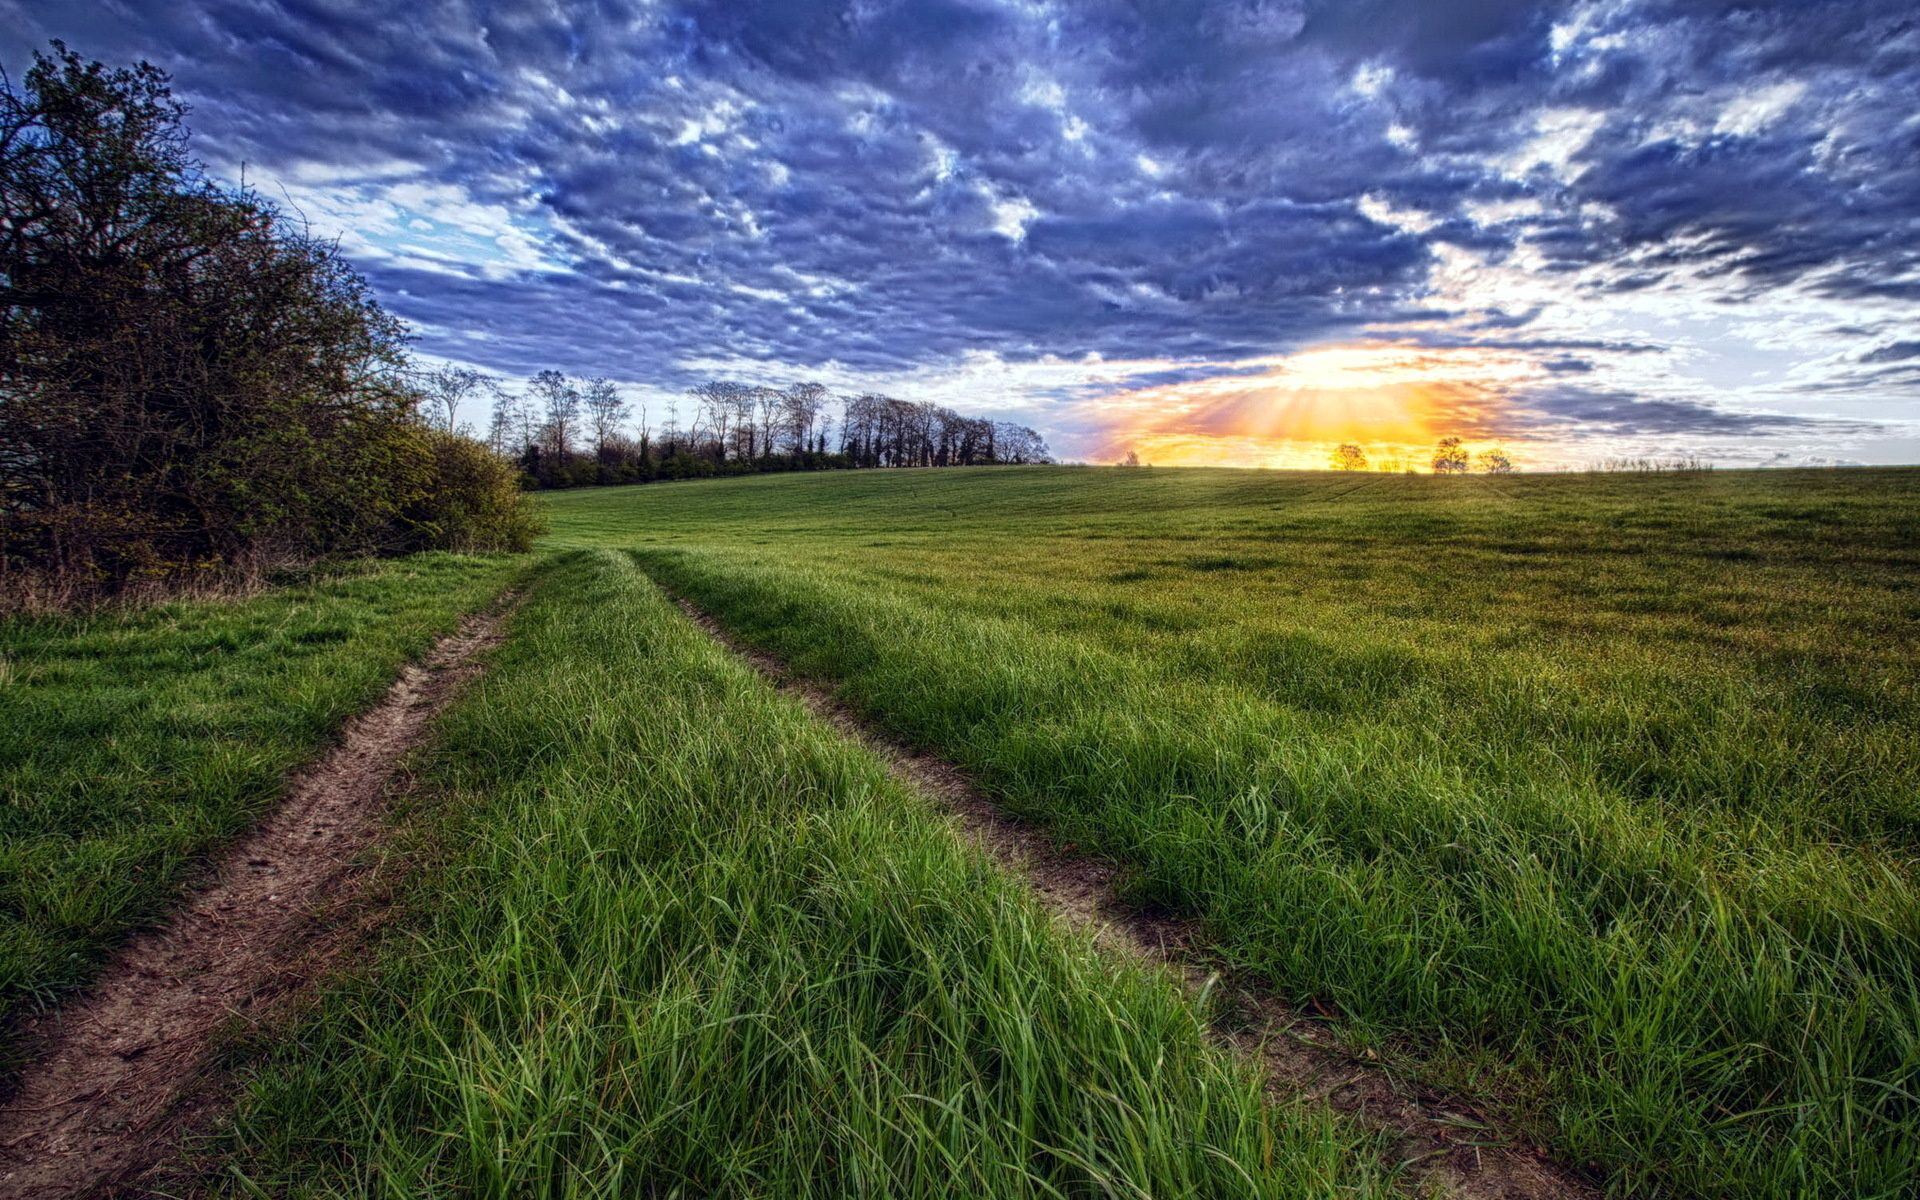 android beams, sun, grass, layers, traces, light, clouds, road, rays, evening, field, shine, nature, orange